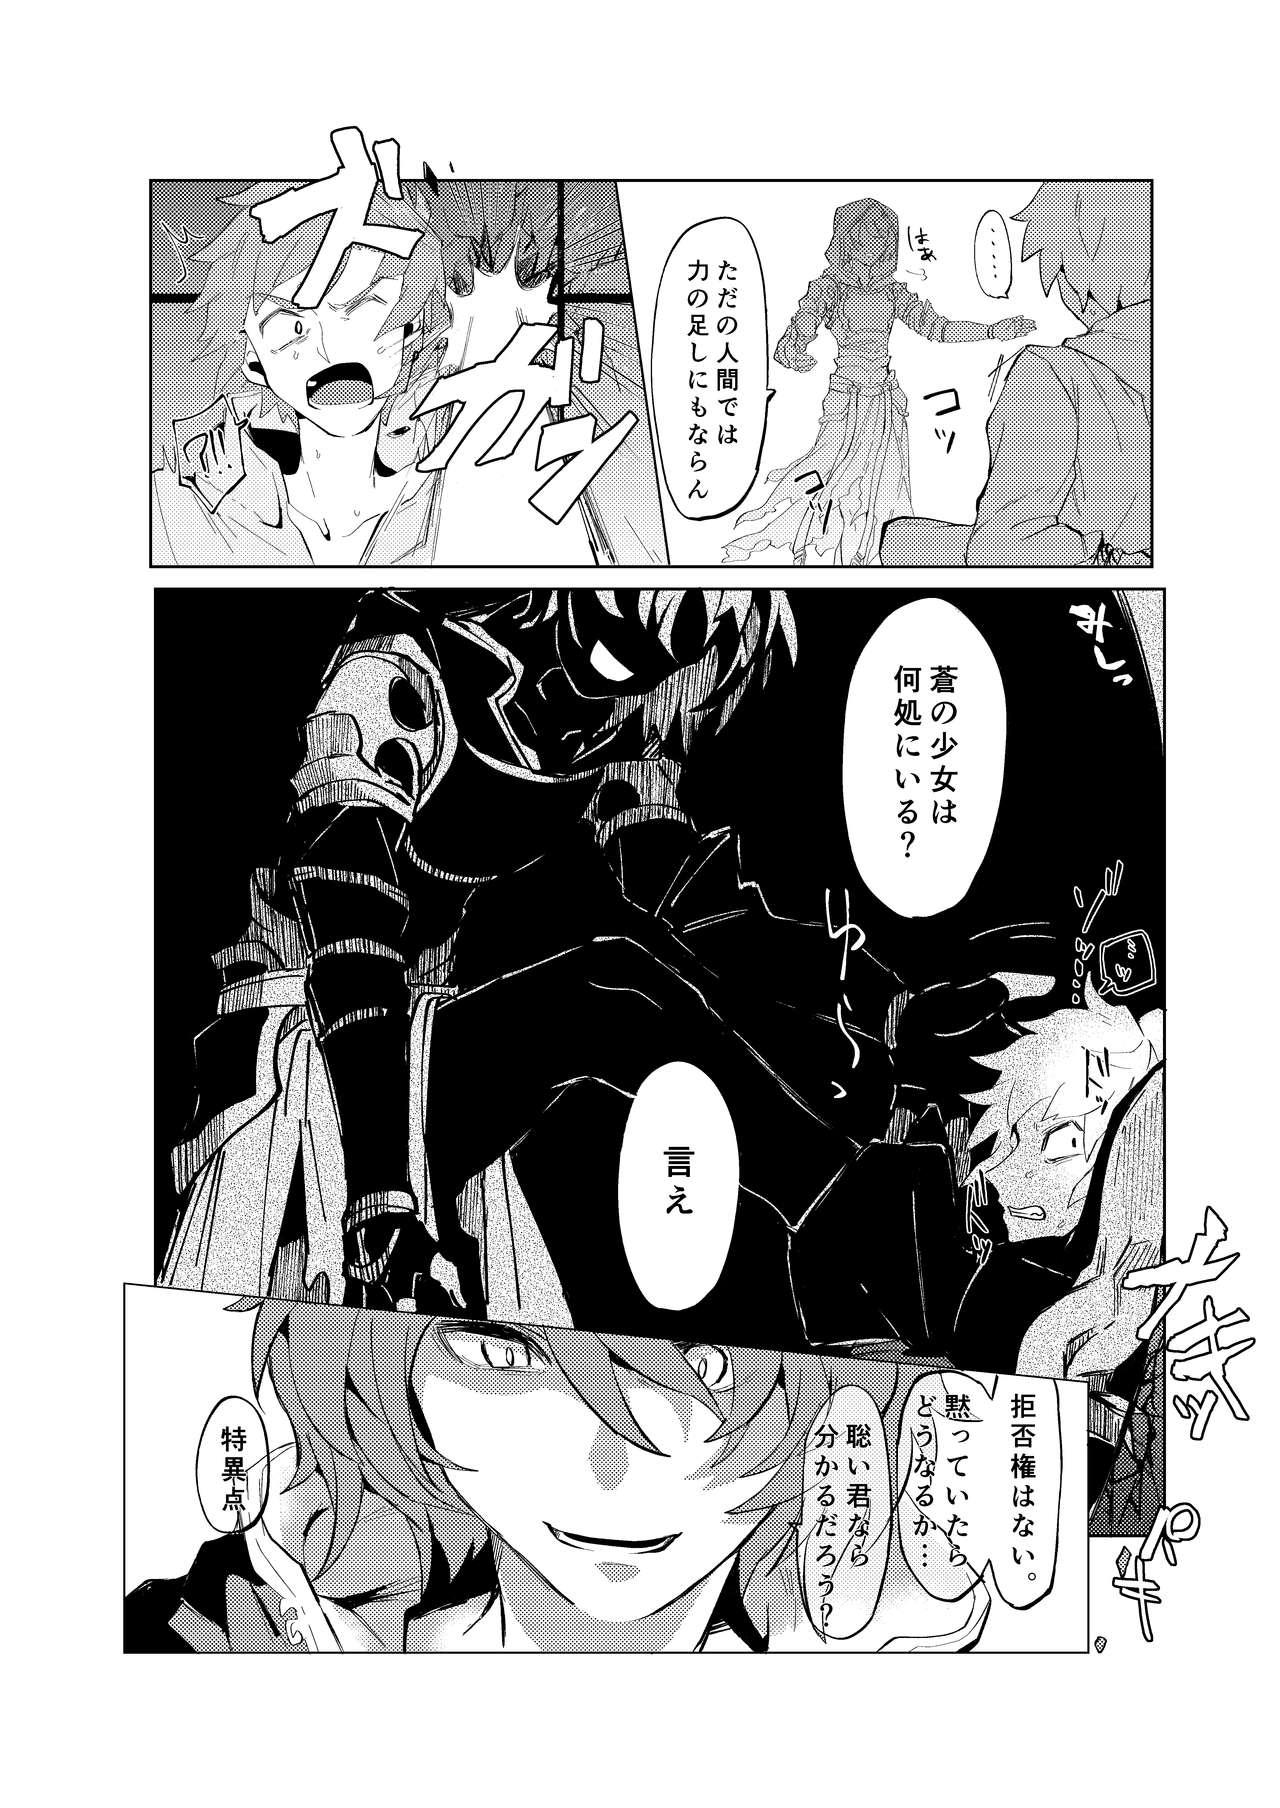 Freaky Disaster - Granblue fantasy Penetration - Page 5